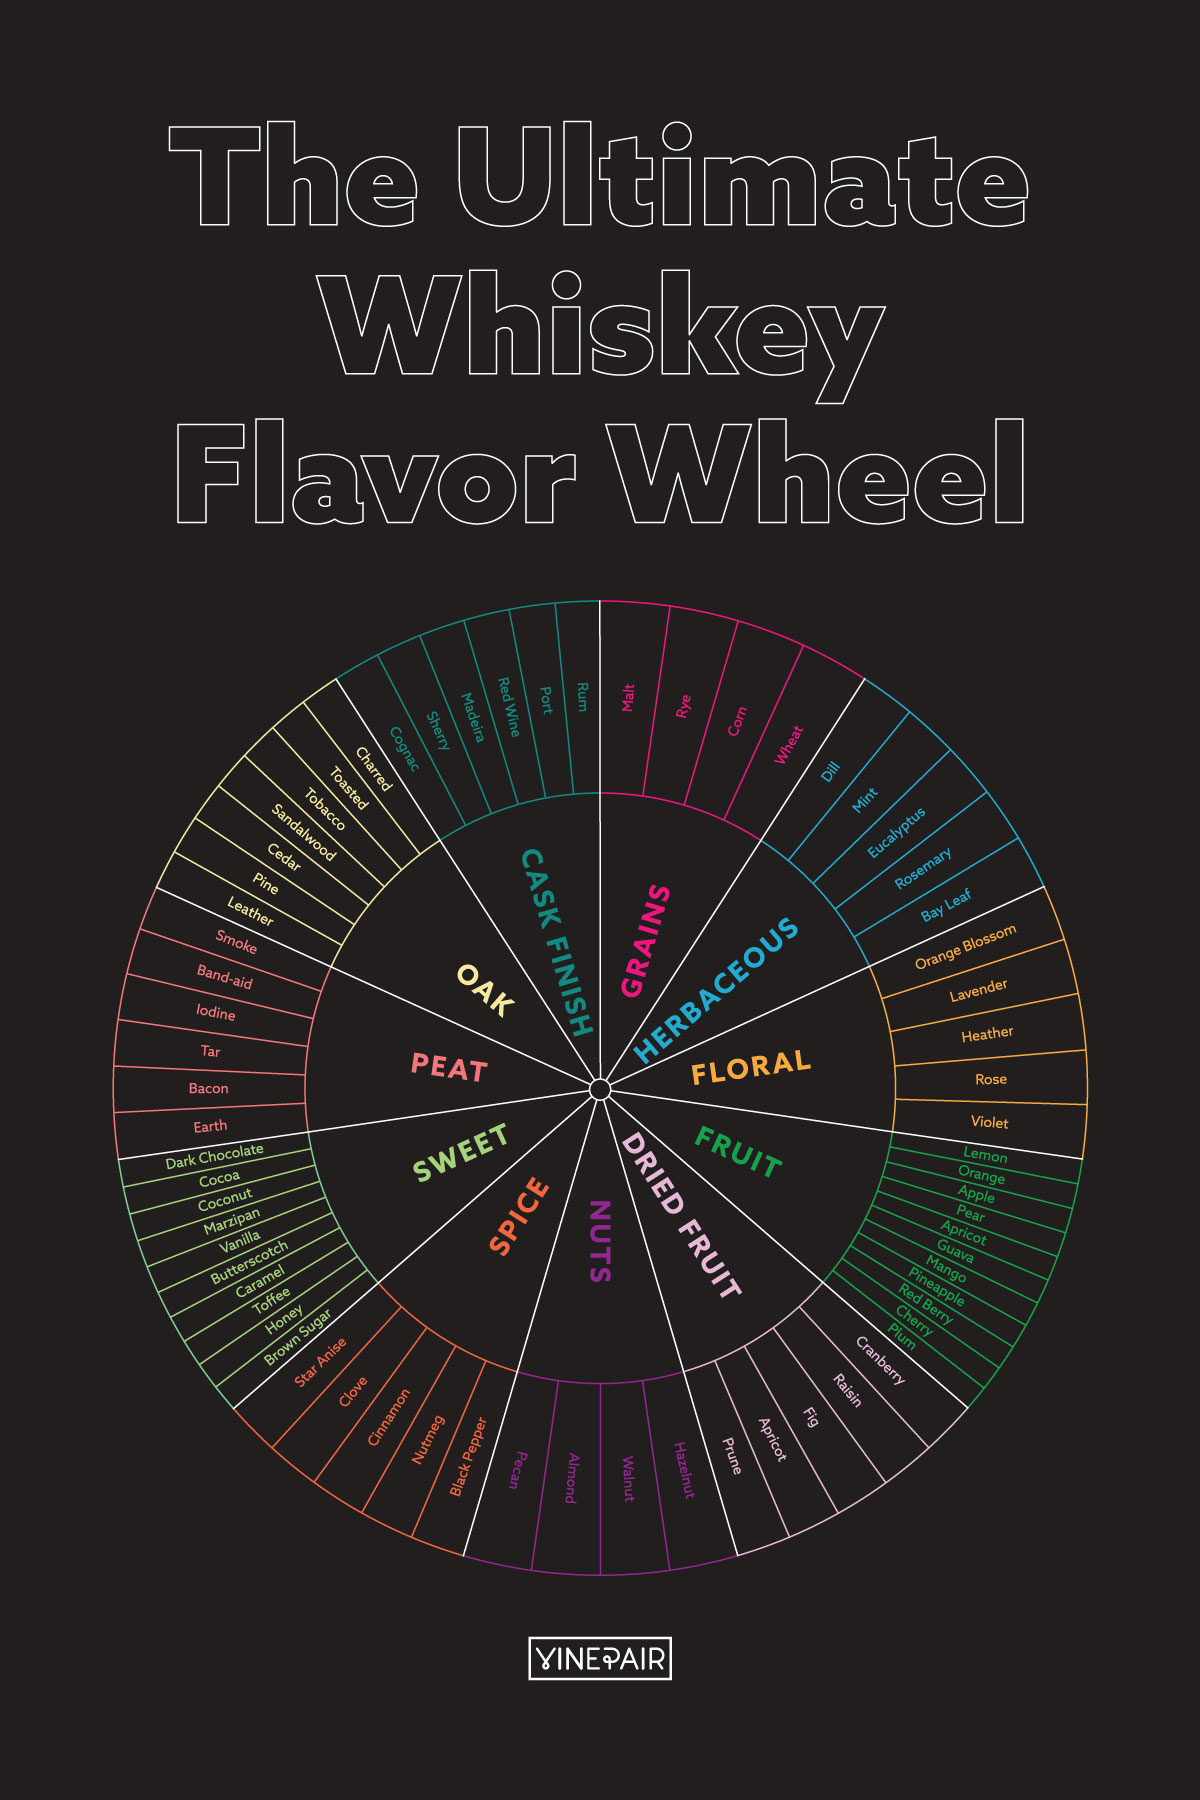 Understand all the flavors and aromas in your glass with this ultimate whiskey flavor wheel.